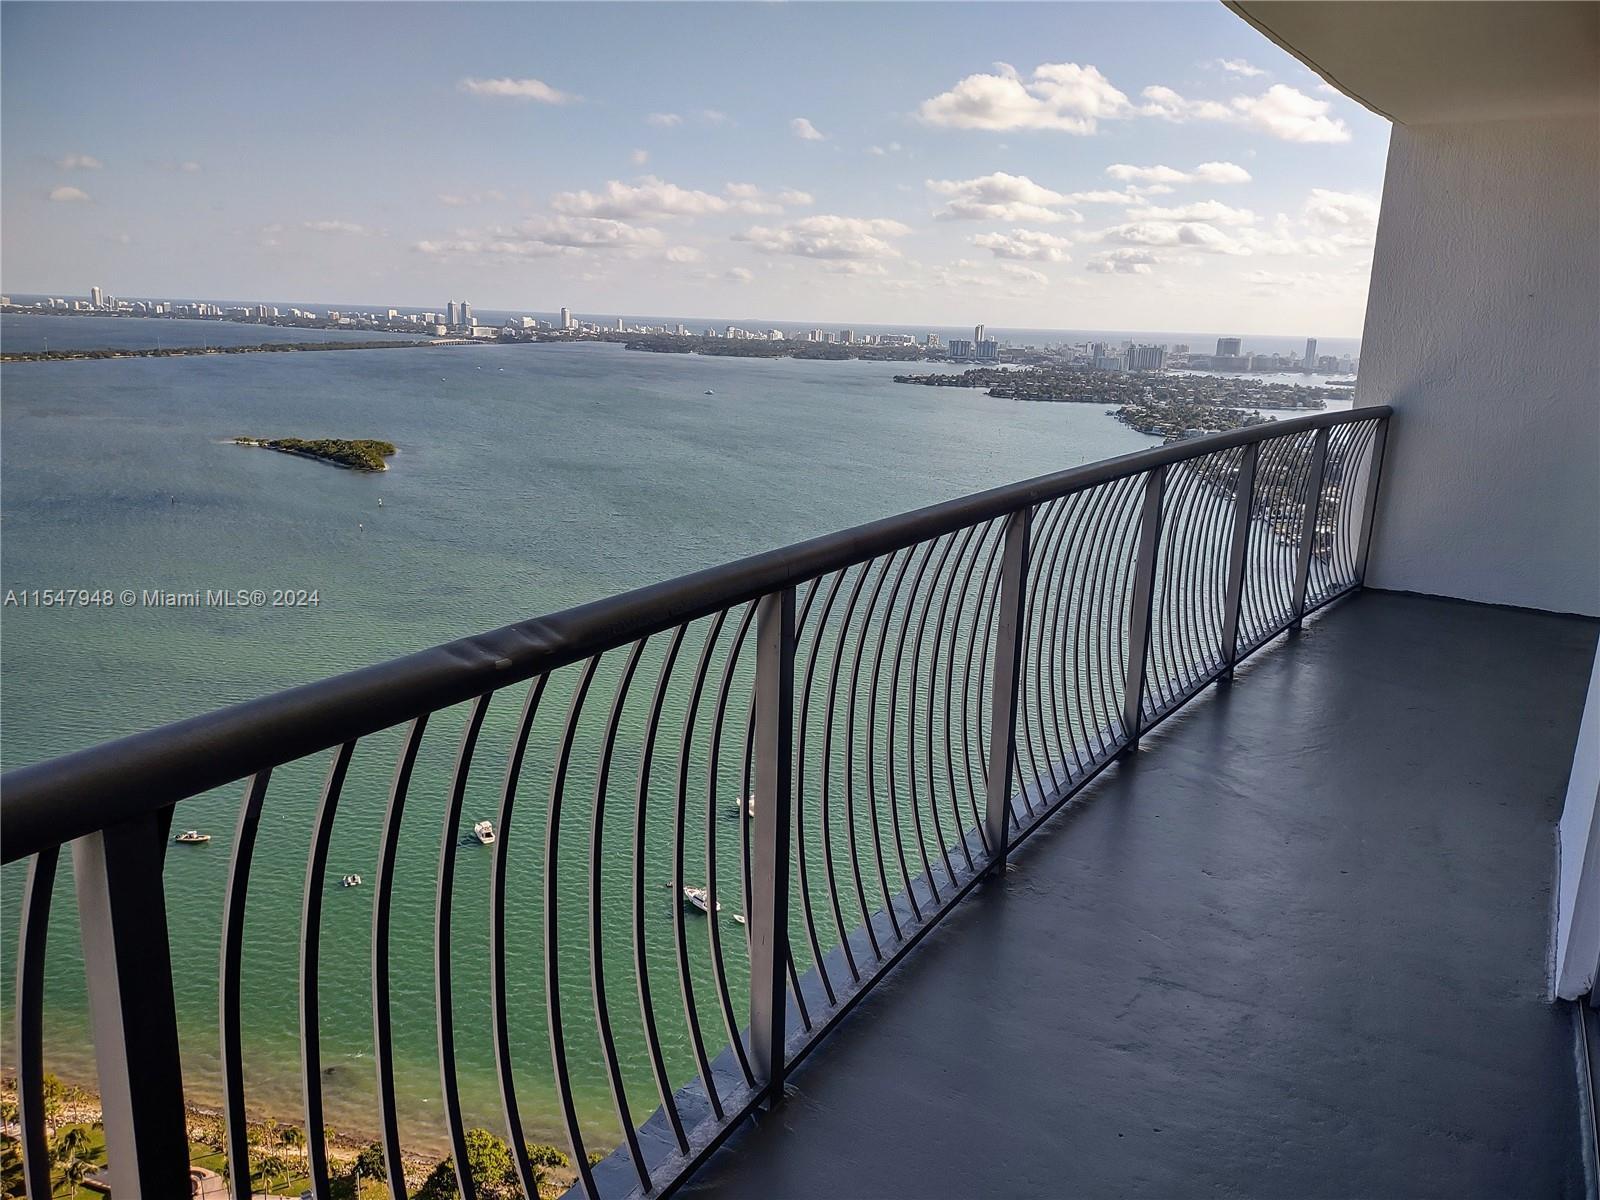 GREAT OPPORTUNITY HIGH FLOOR UNIT @ OPERA TOWER. BEST LINE 1 BED 1 BATH WITH AMAZING BAY VIEWS. SHORT-TERM LEASES ALLOWED, MIN 30 DAYS, ENJOY AND RENT WHEN NOT IN MIAMI, LARGE WRAPAROUND TERRACE W FLOOR TO CEILING HIGH IMPACT WINDOWS, GRANITE COUNTERS, BRAND NEW WASHER/DRYER, ENJOY GREAT AMENITIES GYM, SAUNA, JACUZZI, HEATED POOL. CONCIERGE 24 HRS SECURITY, FACE RECOGNITION, MANAGEMENT ONSITE. ALL UTILITIES INCLUDED EXCEPT ELECTRICITY.  GREAT PARK ACROSS W TENNIS COURTS & BAYFRONT TRAILS. TRENDY & VIBRANT GROWING EDGEWATER LOCATION, CLOSE TO WYNWOOD , DESIGN DISTRICT & DOWNTOWN. VACANT.
CALL L/A FOR  SHOWING INSTRUCTIONS